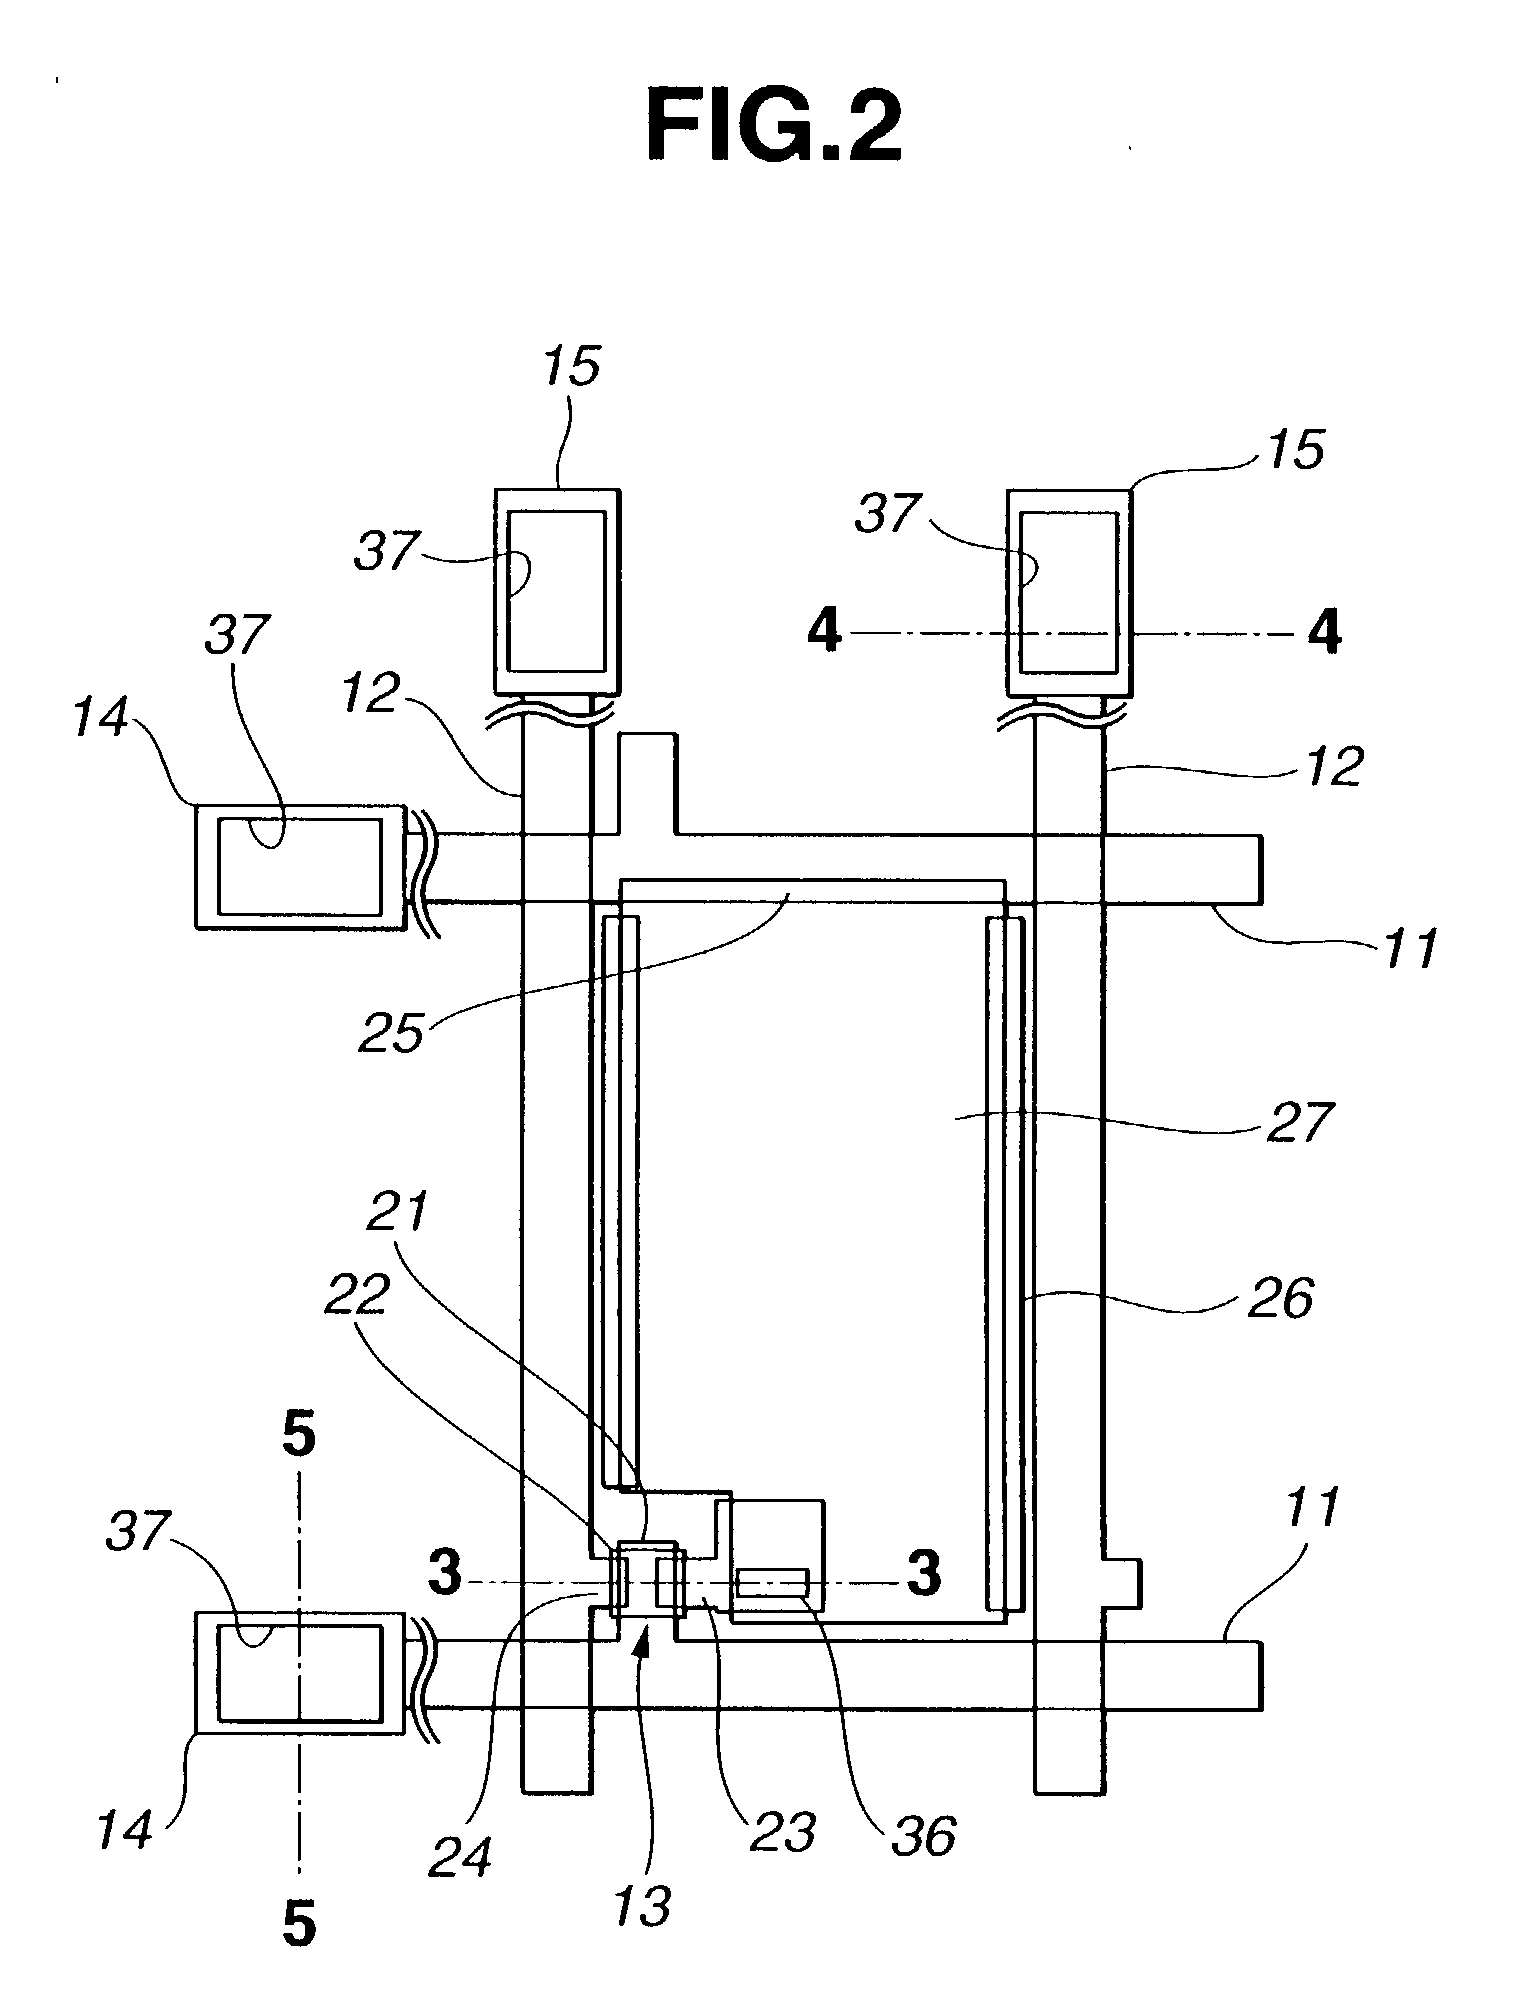 Active matrix substrate for liquid crystal display and its fabrication